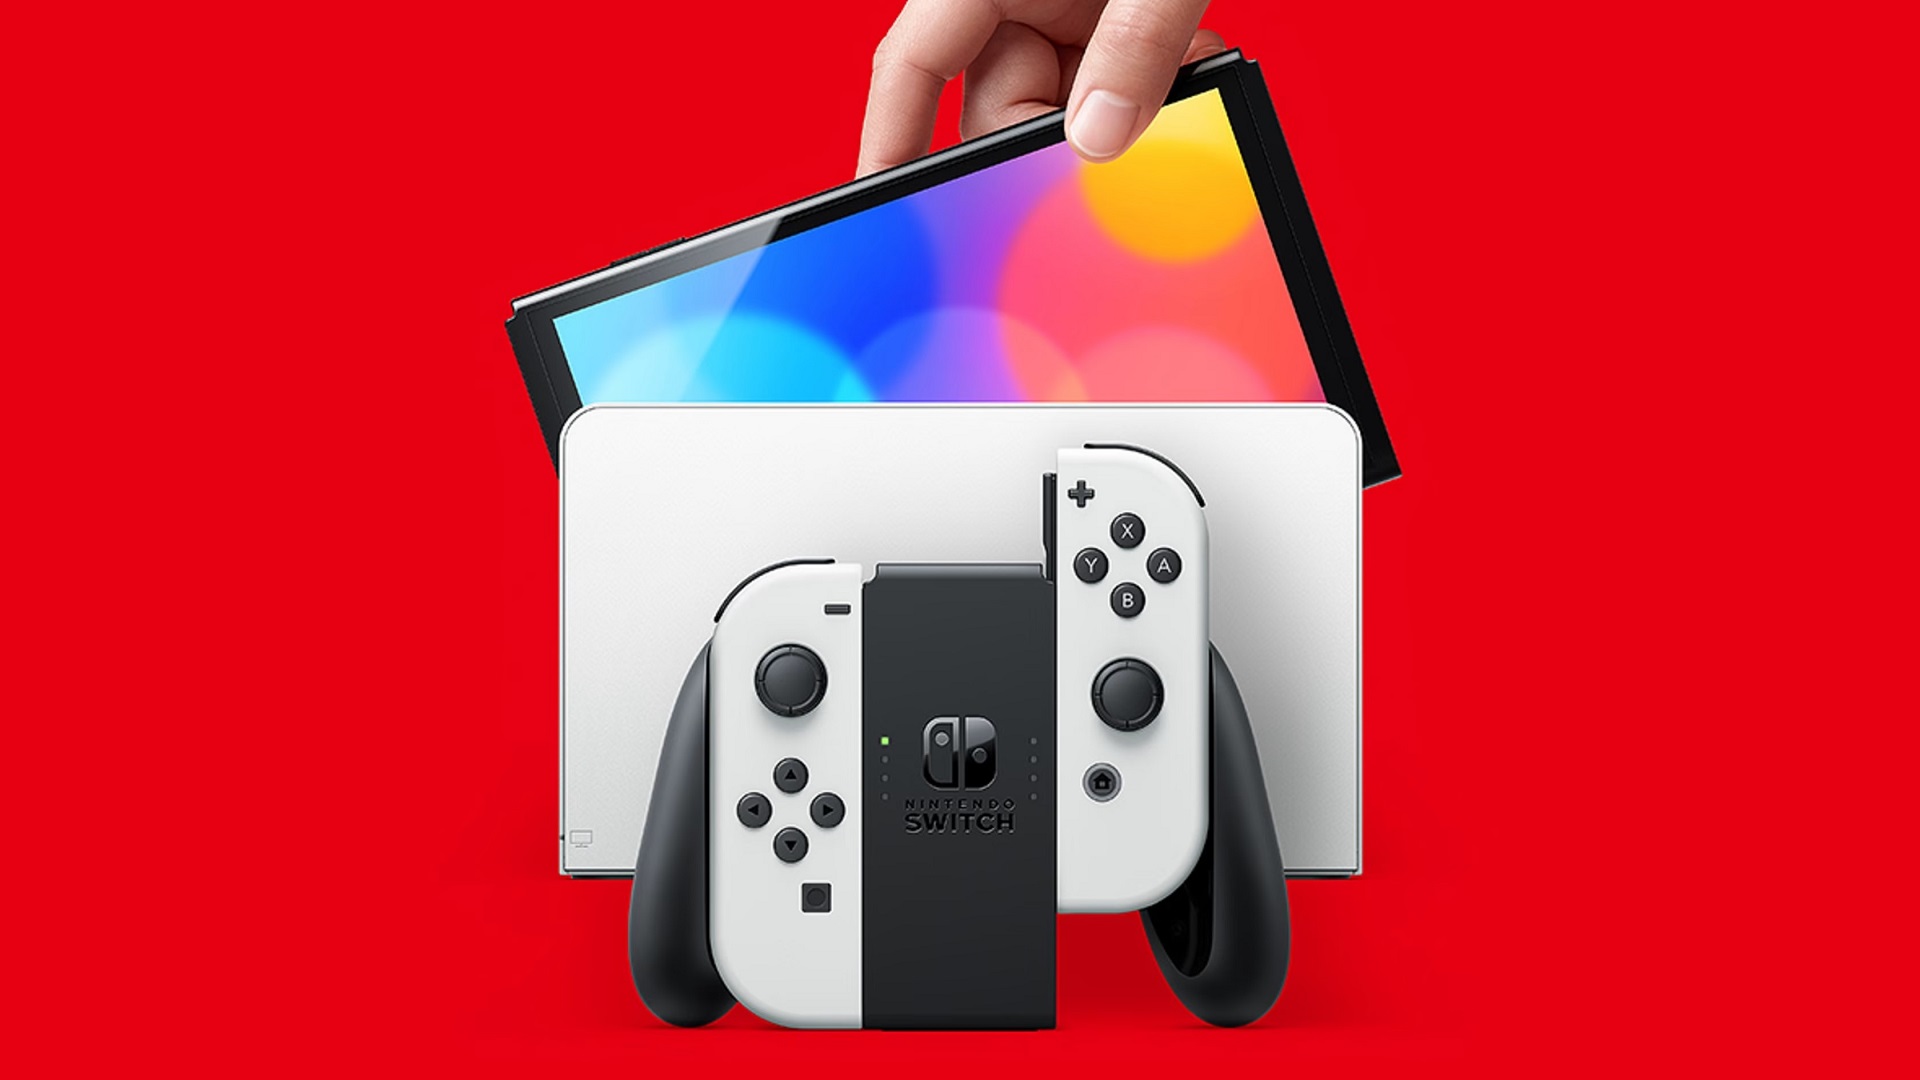 Successful leaker assures that we would see a new Nintendo Switch model in winter 2023